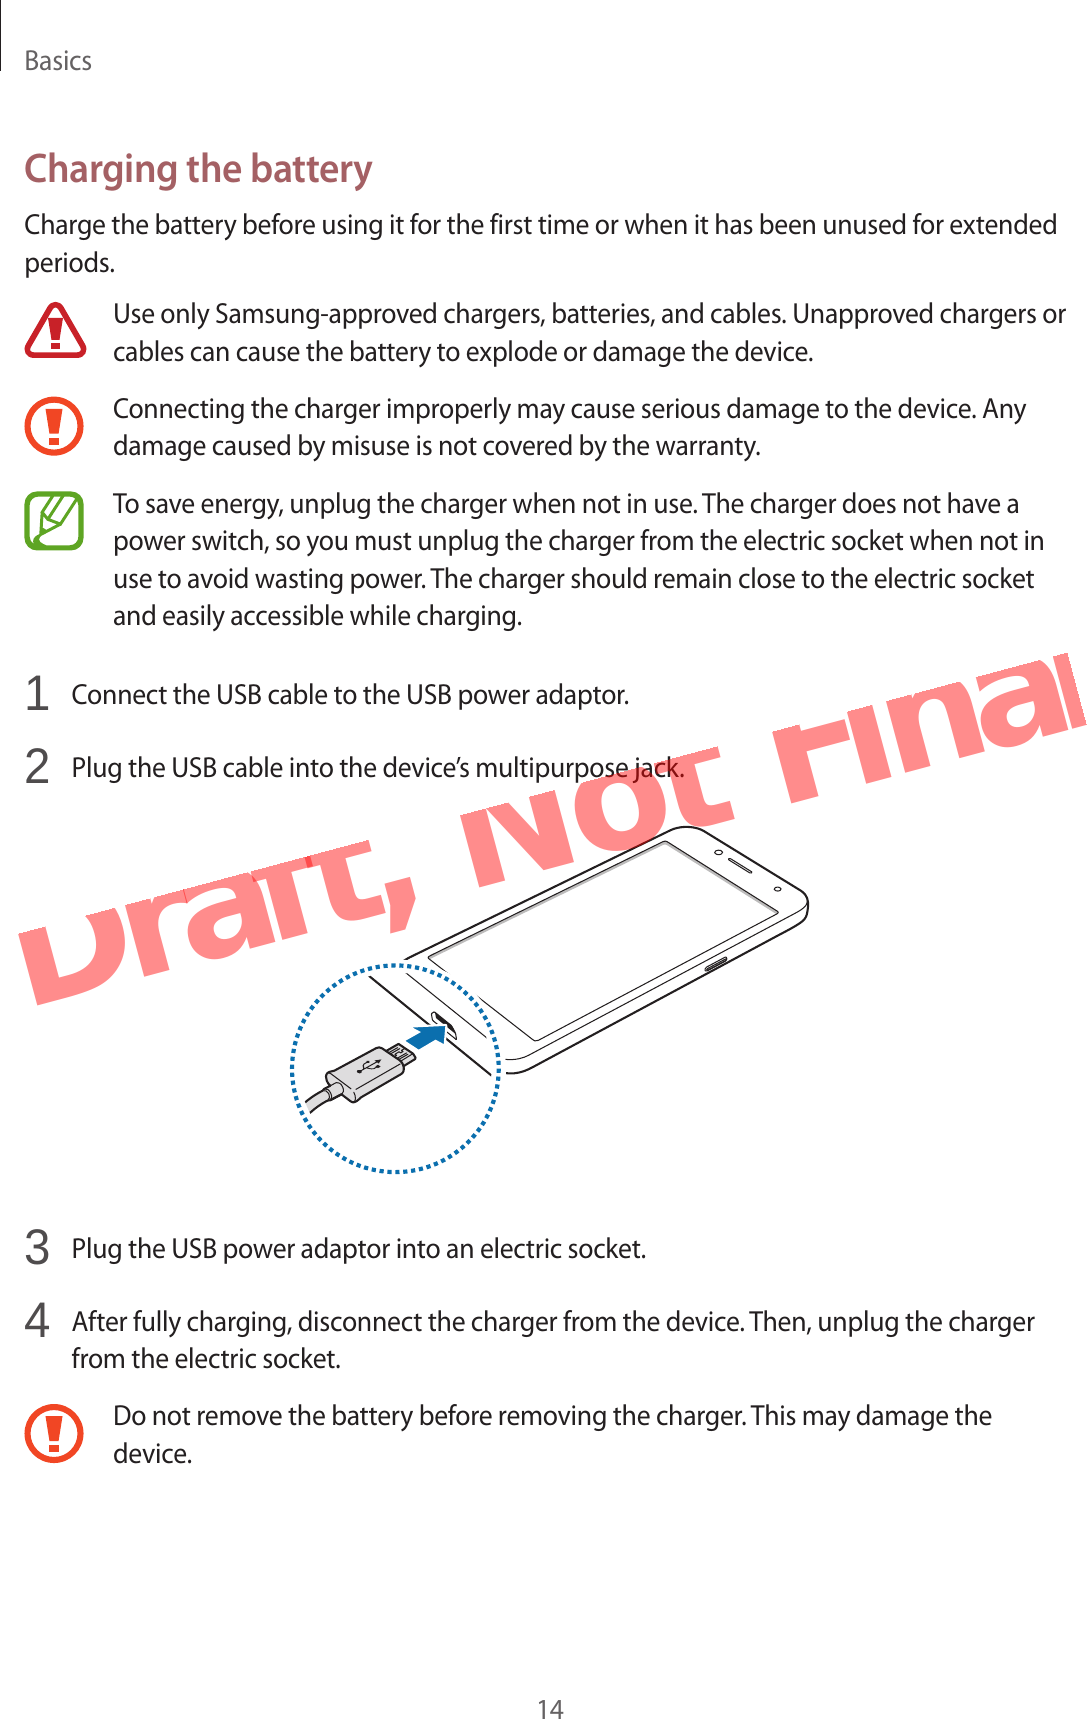 Basics14Charging the batteryCharge the battery before using it for the first time or when it has been unused for extended periods.Use only Samsung-approved chargers, batteries, and cables. Unapproved chargers or cables can cause the battery to explode or damage the device.Connecting the charger improperly may cause serious damage to the device. Any damage caused by misuse is not covered by the warranty.To save energy, unplug the charger when not in use. The charger does not have a power switch, so you must unplug the charger from the electric socket when not in use to avoid wasting power. The charger should remain close to the electric socket and easily accessible while charging.1  Connect the USB cable to the USB power adaptor.2  Plug the USB cable into the device’s multipurpose jack.3  Plug the USB power adaptor into an electric socket.4  After fully charging, disconnect the charger from the device. Then, unplug the charger from the electric socket.Do not remove the battery before removing the charger. This may damage the device.Draft,  Not  Final